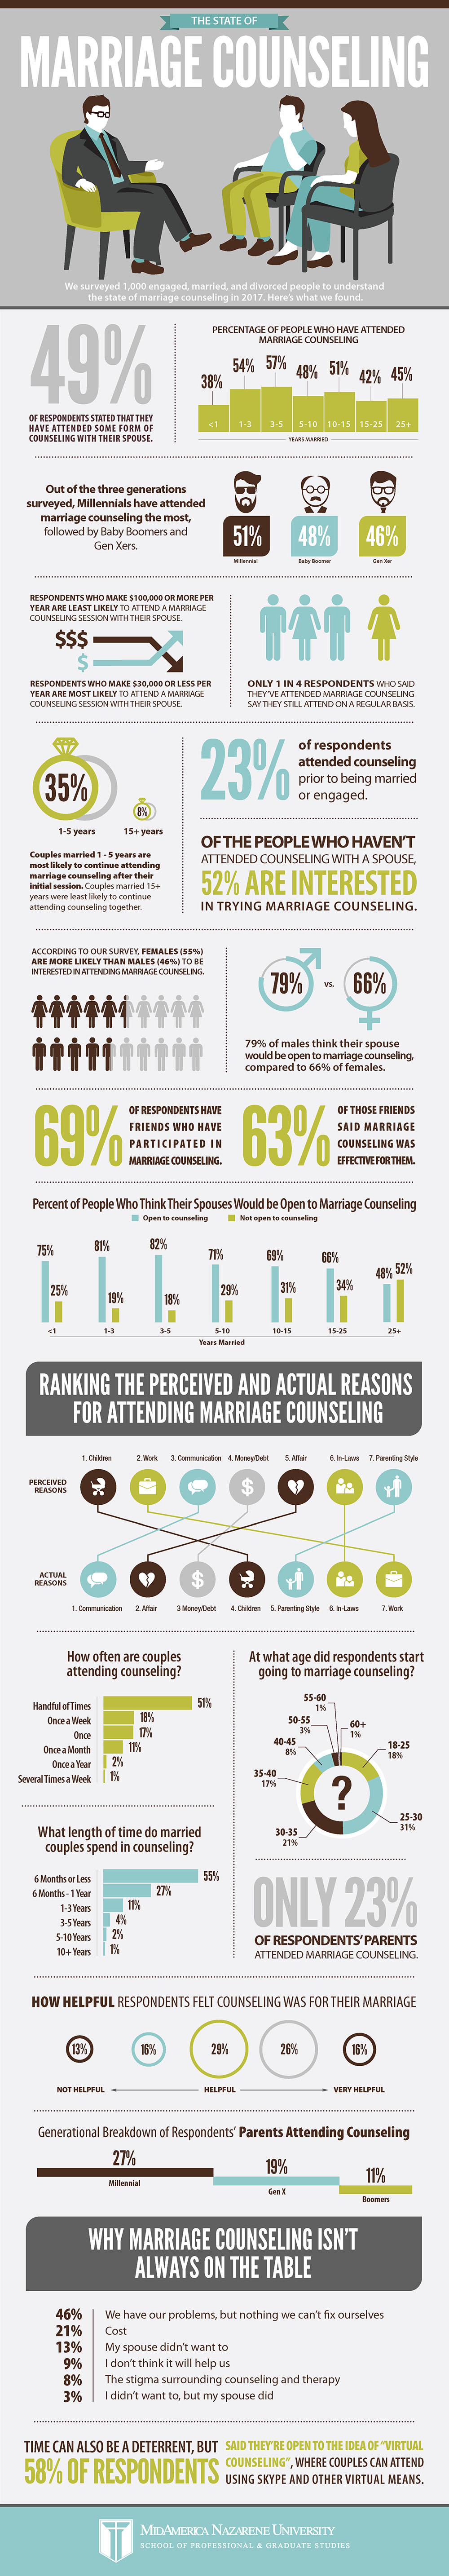 The State of Marriage Counseling